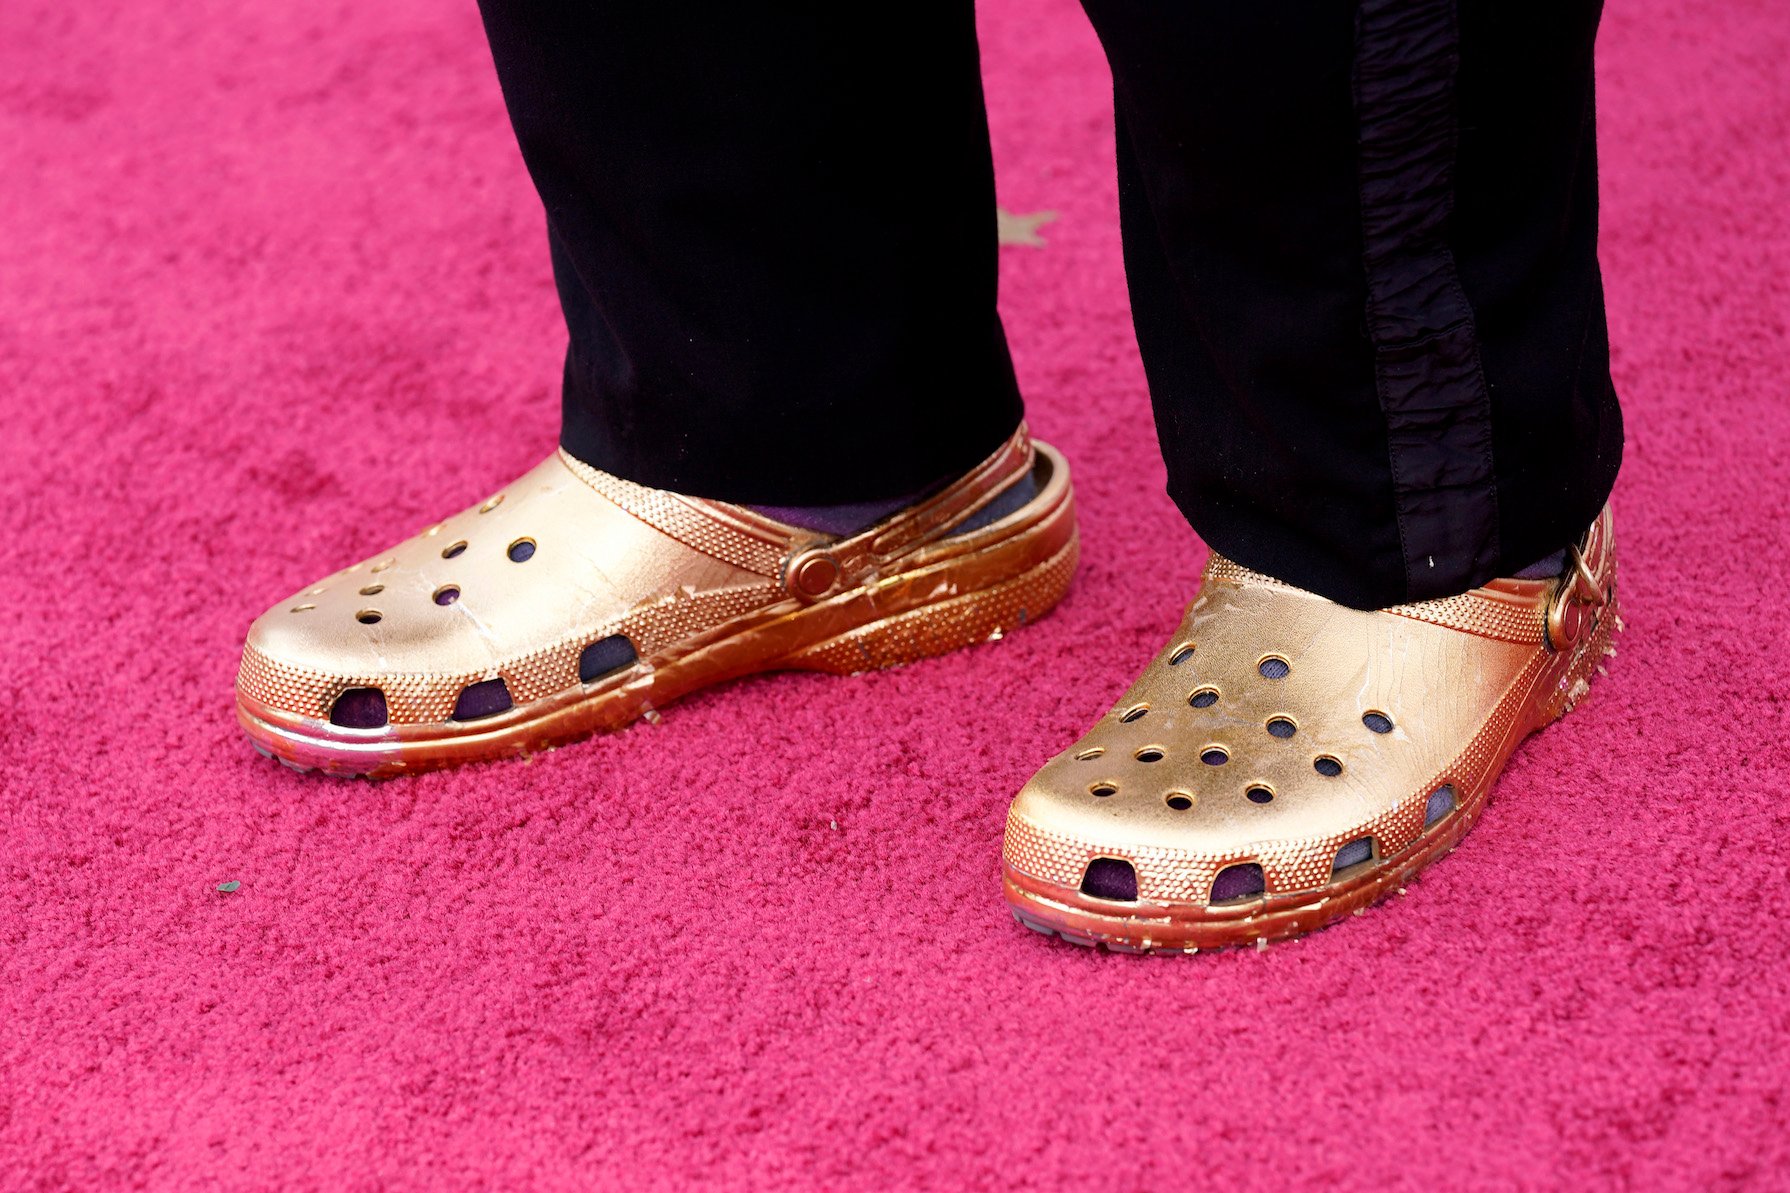 QuestLove's Oscar's footwear -- gold Crocs on the red carpet -- at the Academy Awards 2021 